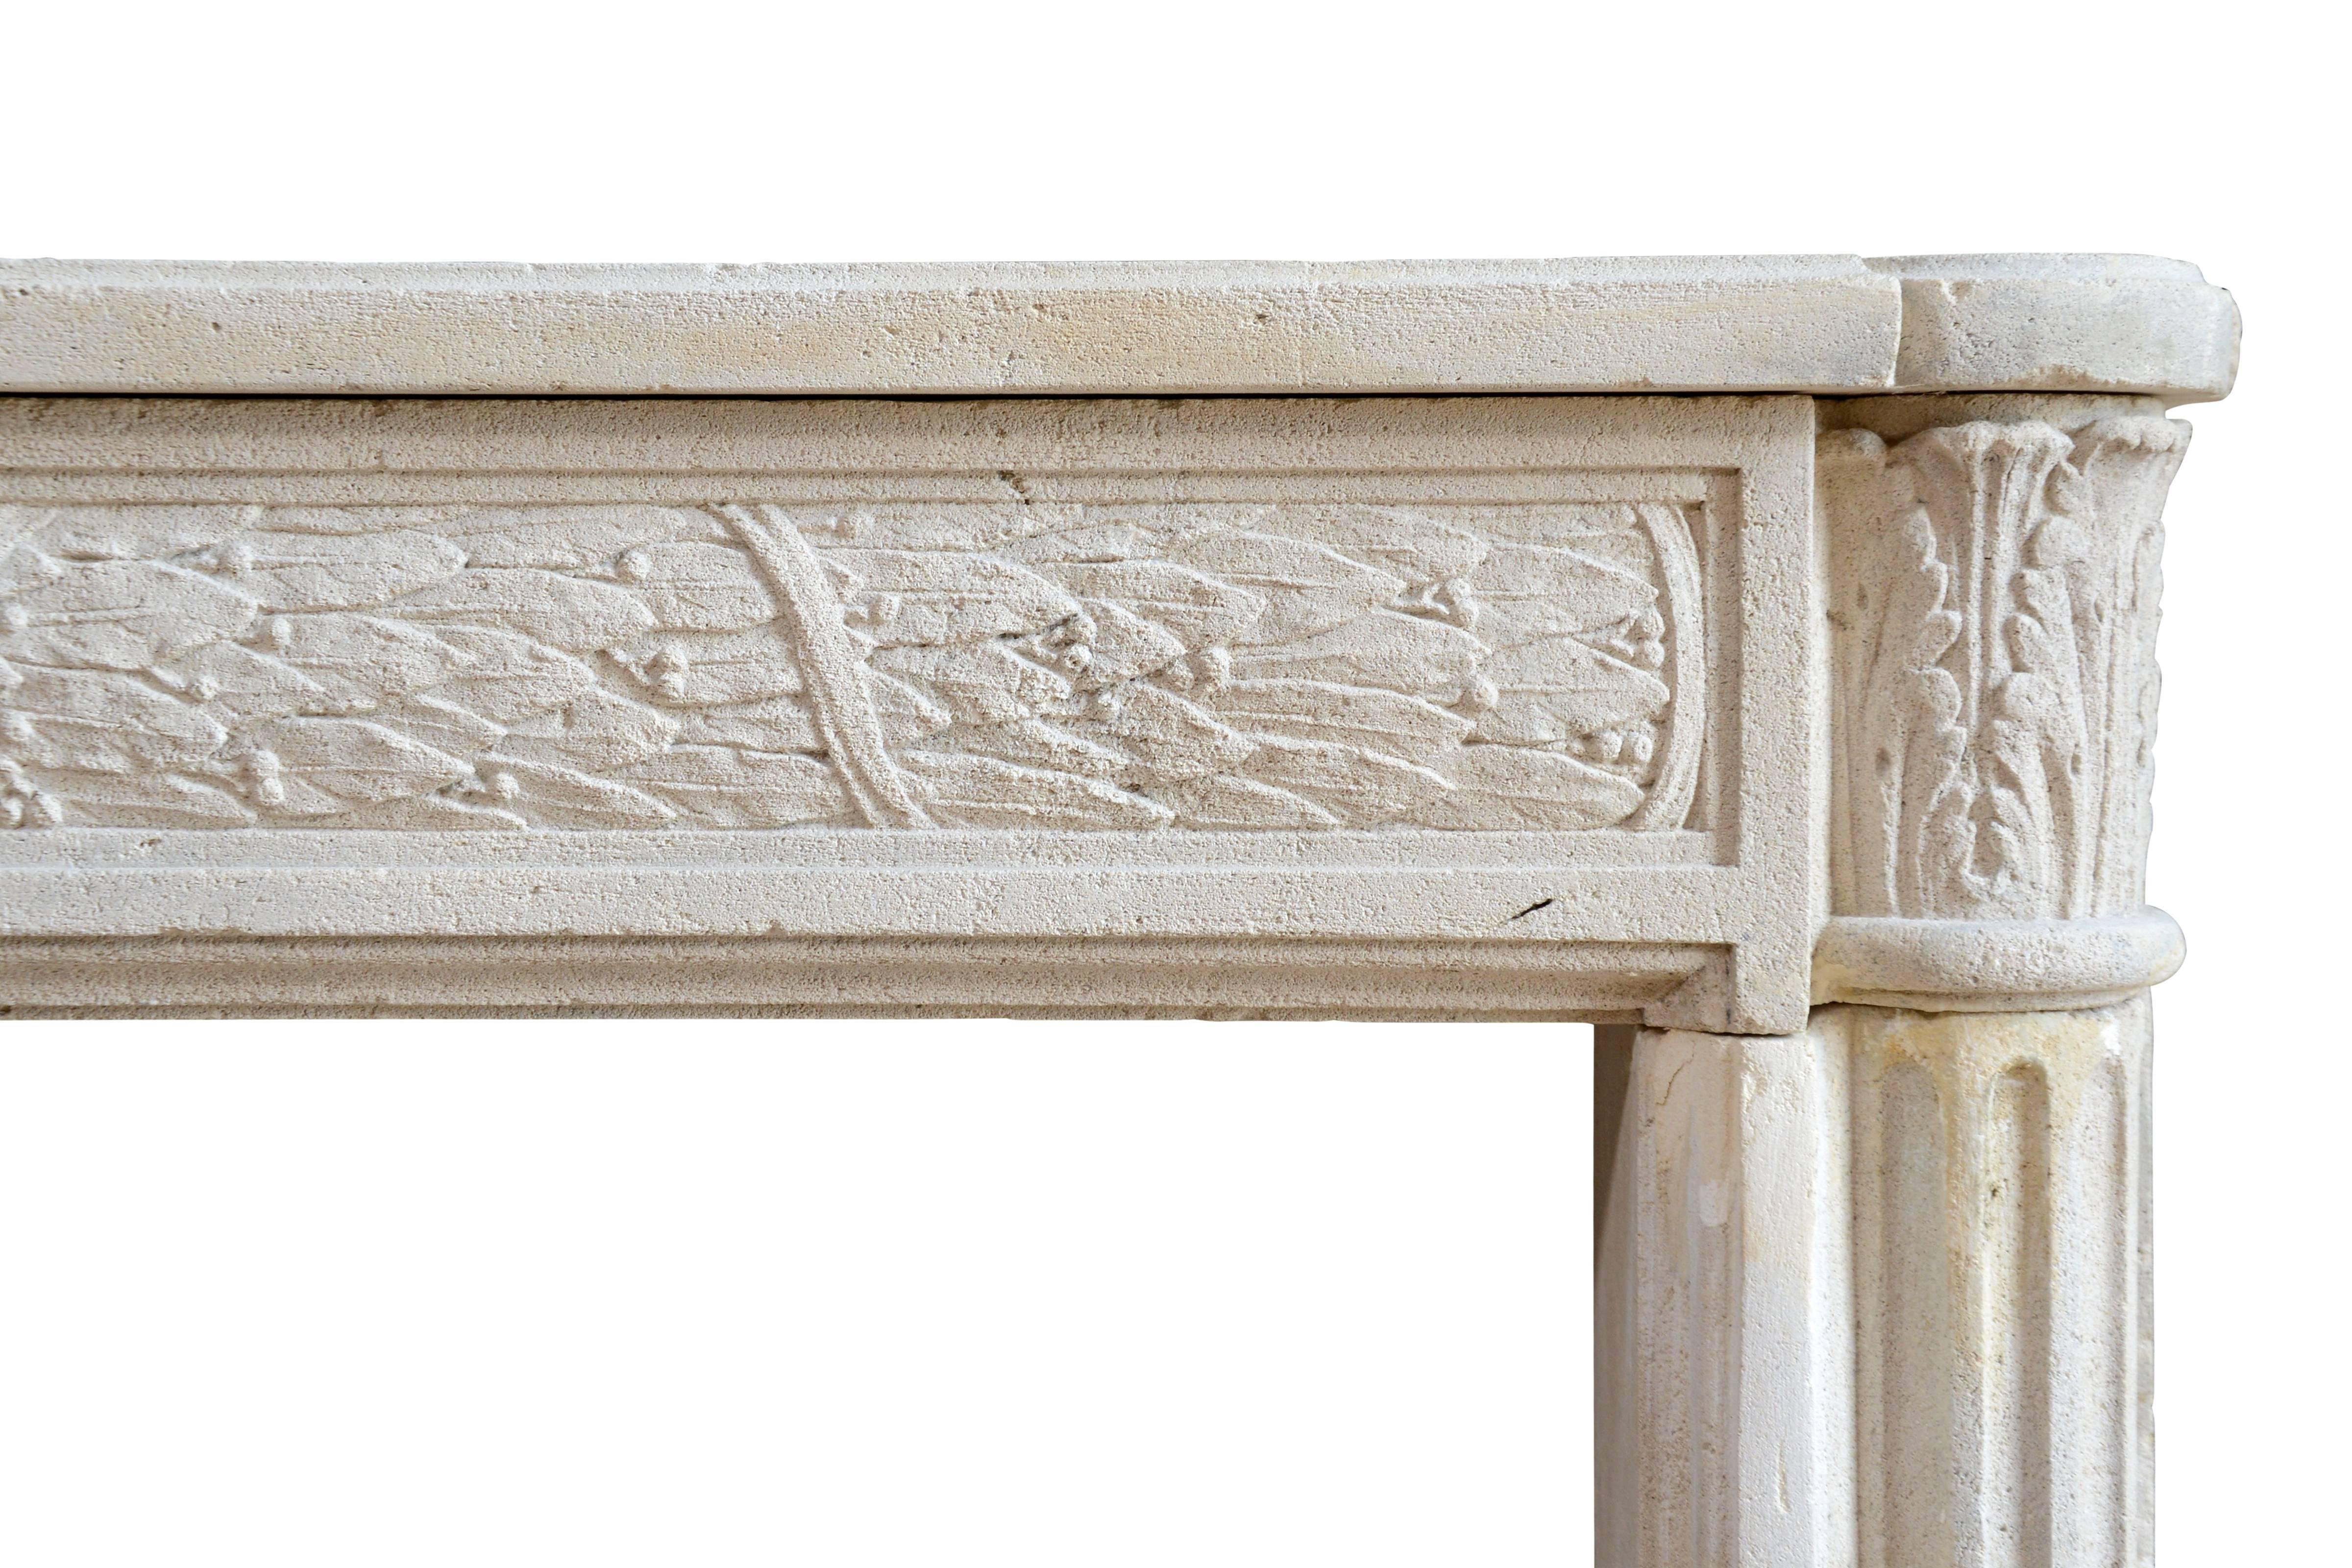 Carved Louis XVI Period Stone Fireplace, 18th Century